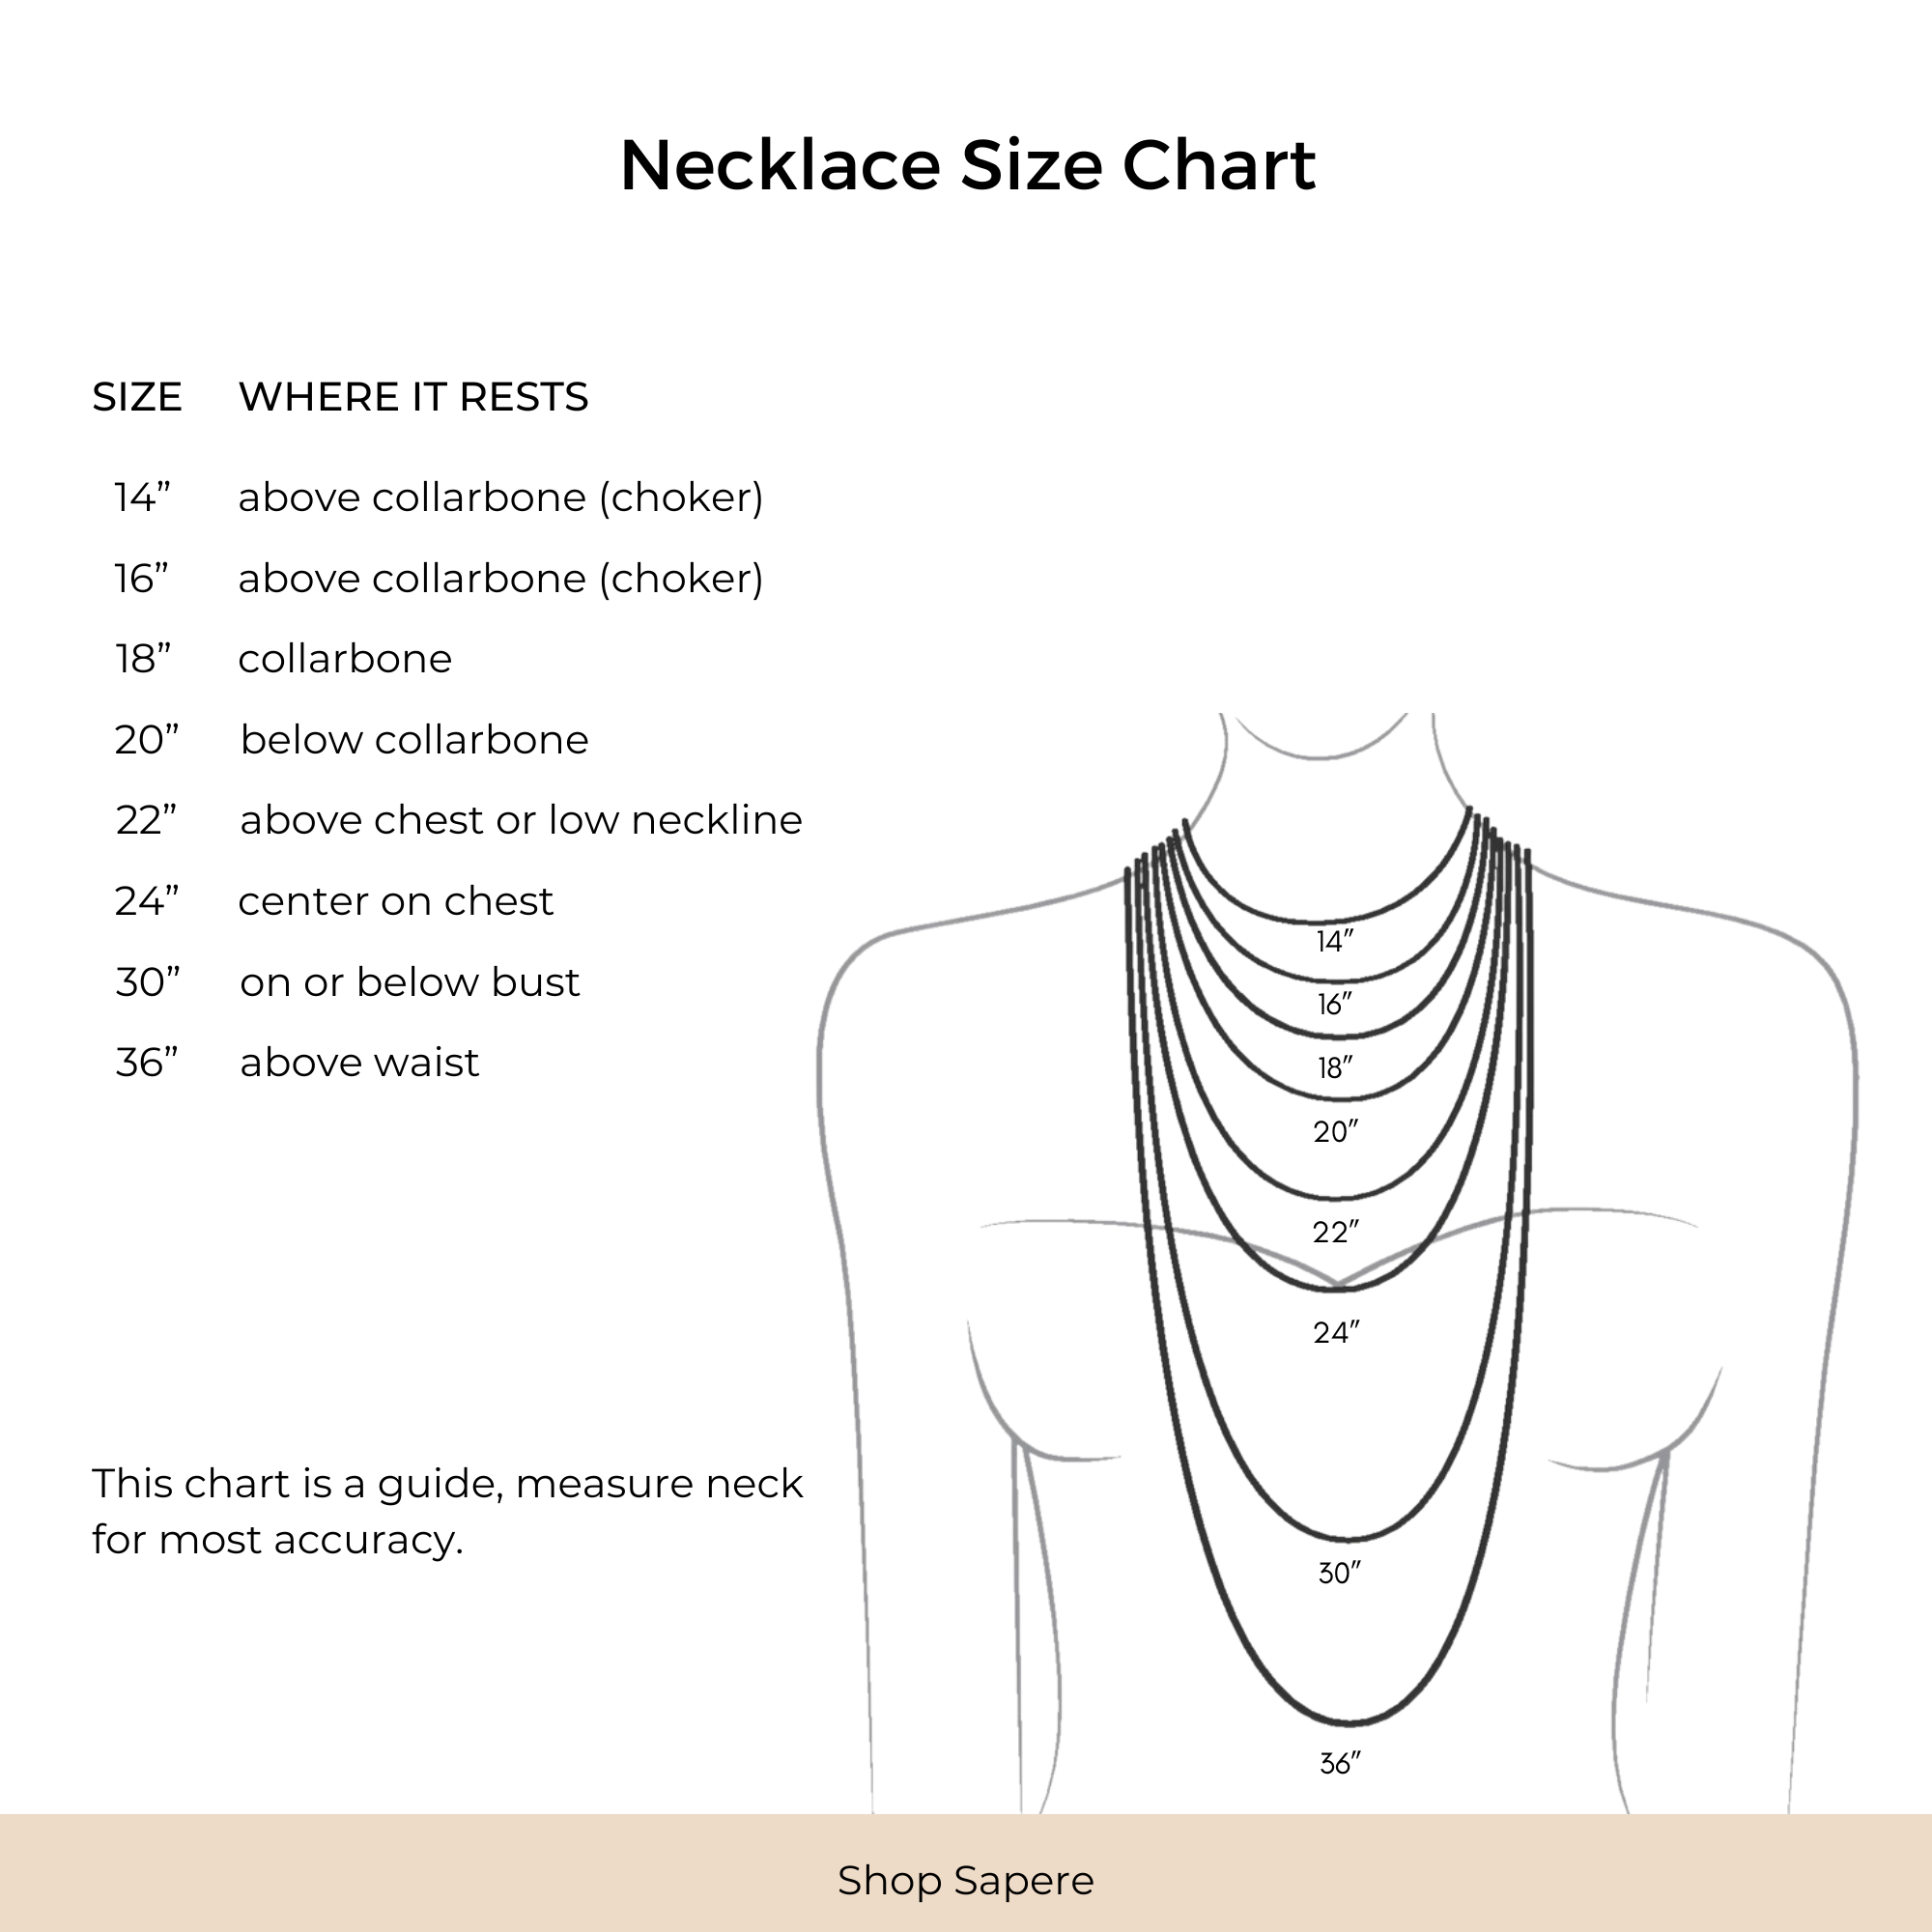 Powell's Owls Teething Necklace Sizing Chart – Powell's Owls